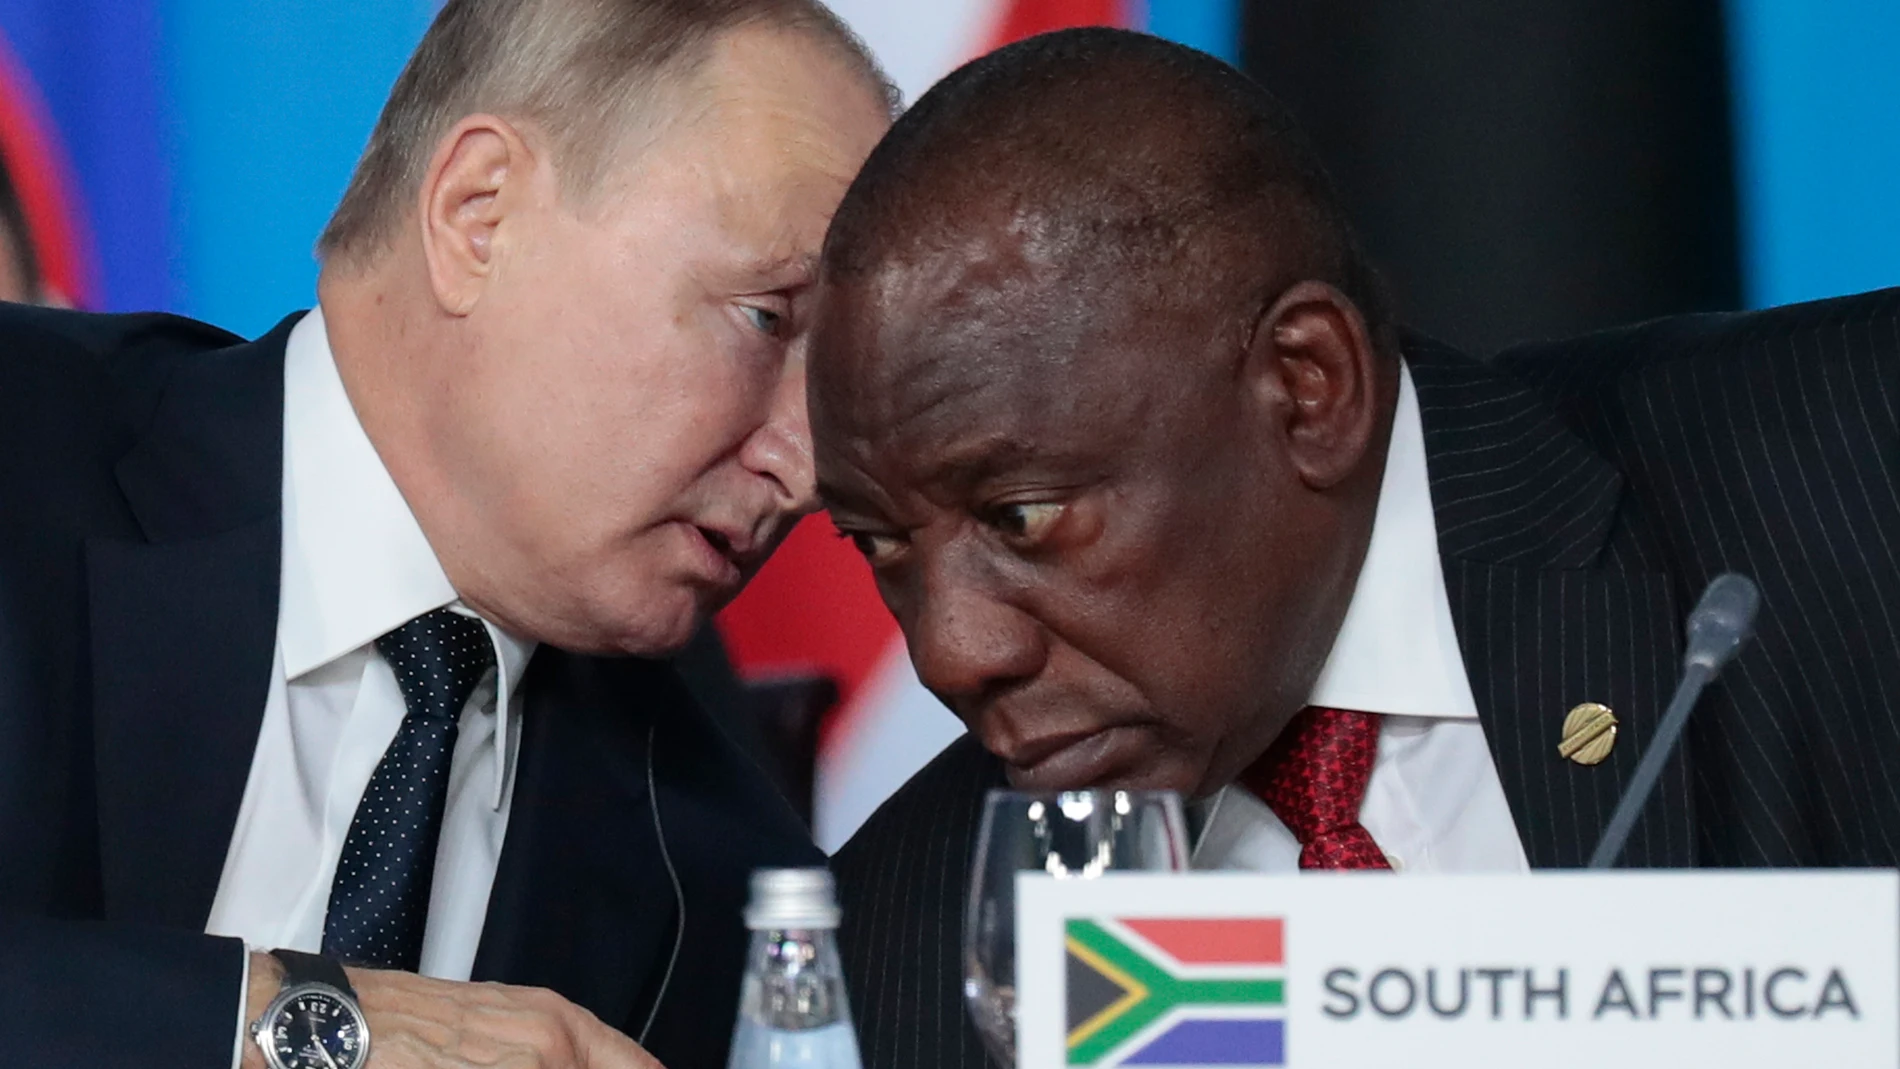 FILE - Russian President Vladimir Putin, left, speaks to South African President, Cyril Ramaphosa, right, during a plenary session at the Russia-Africa summit in the Black Sea resort of Sochi, Russia on Oct. 24, 2019. The U.S. ambassador to South Africa, Reuben Brigety, has accused South Africa of providing weapons to Russia saying the U.S. government was certain that weapons were loaded onto a cargo ship that docked secretly at a naval base near the city of Cape Town for three days in December. (Sergei Chirikov/Pool Photo via AP, File)